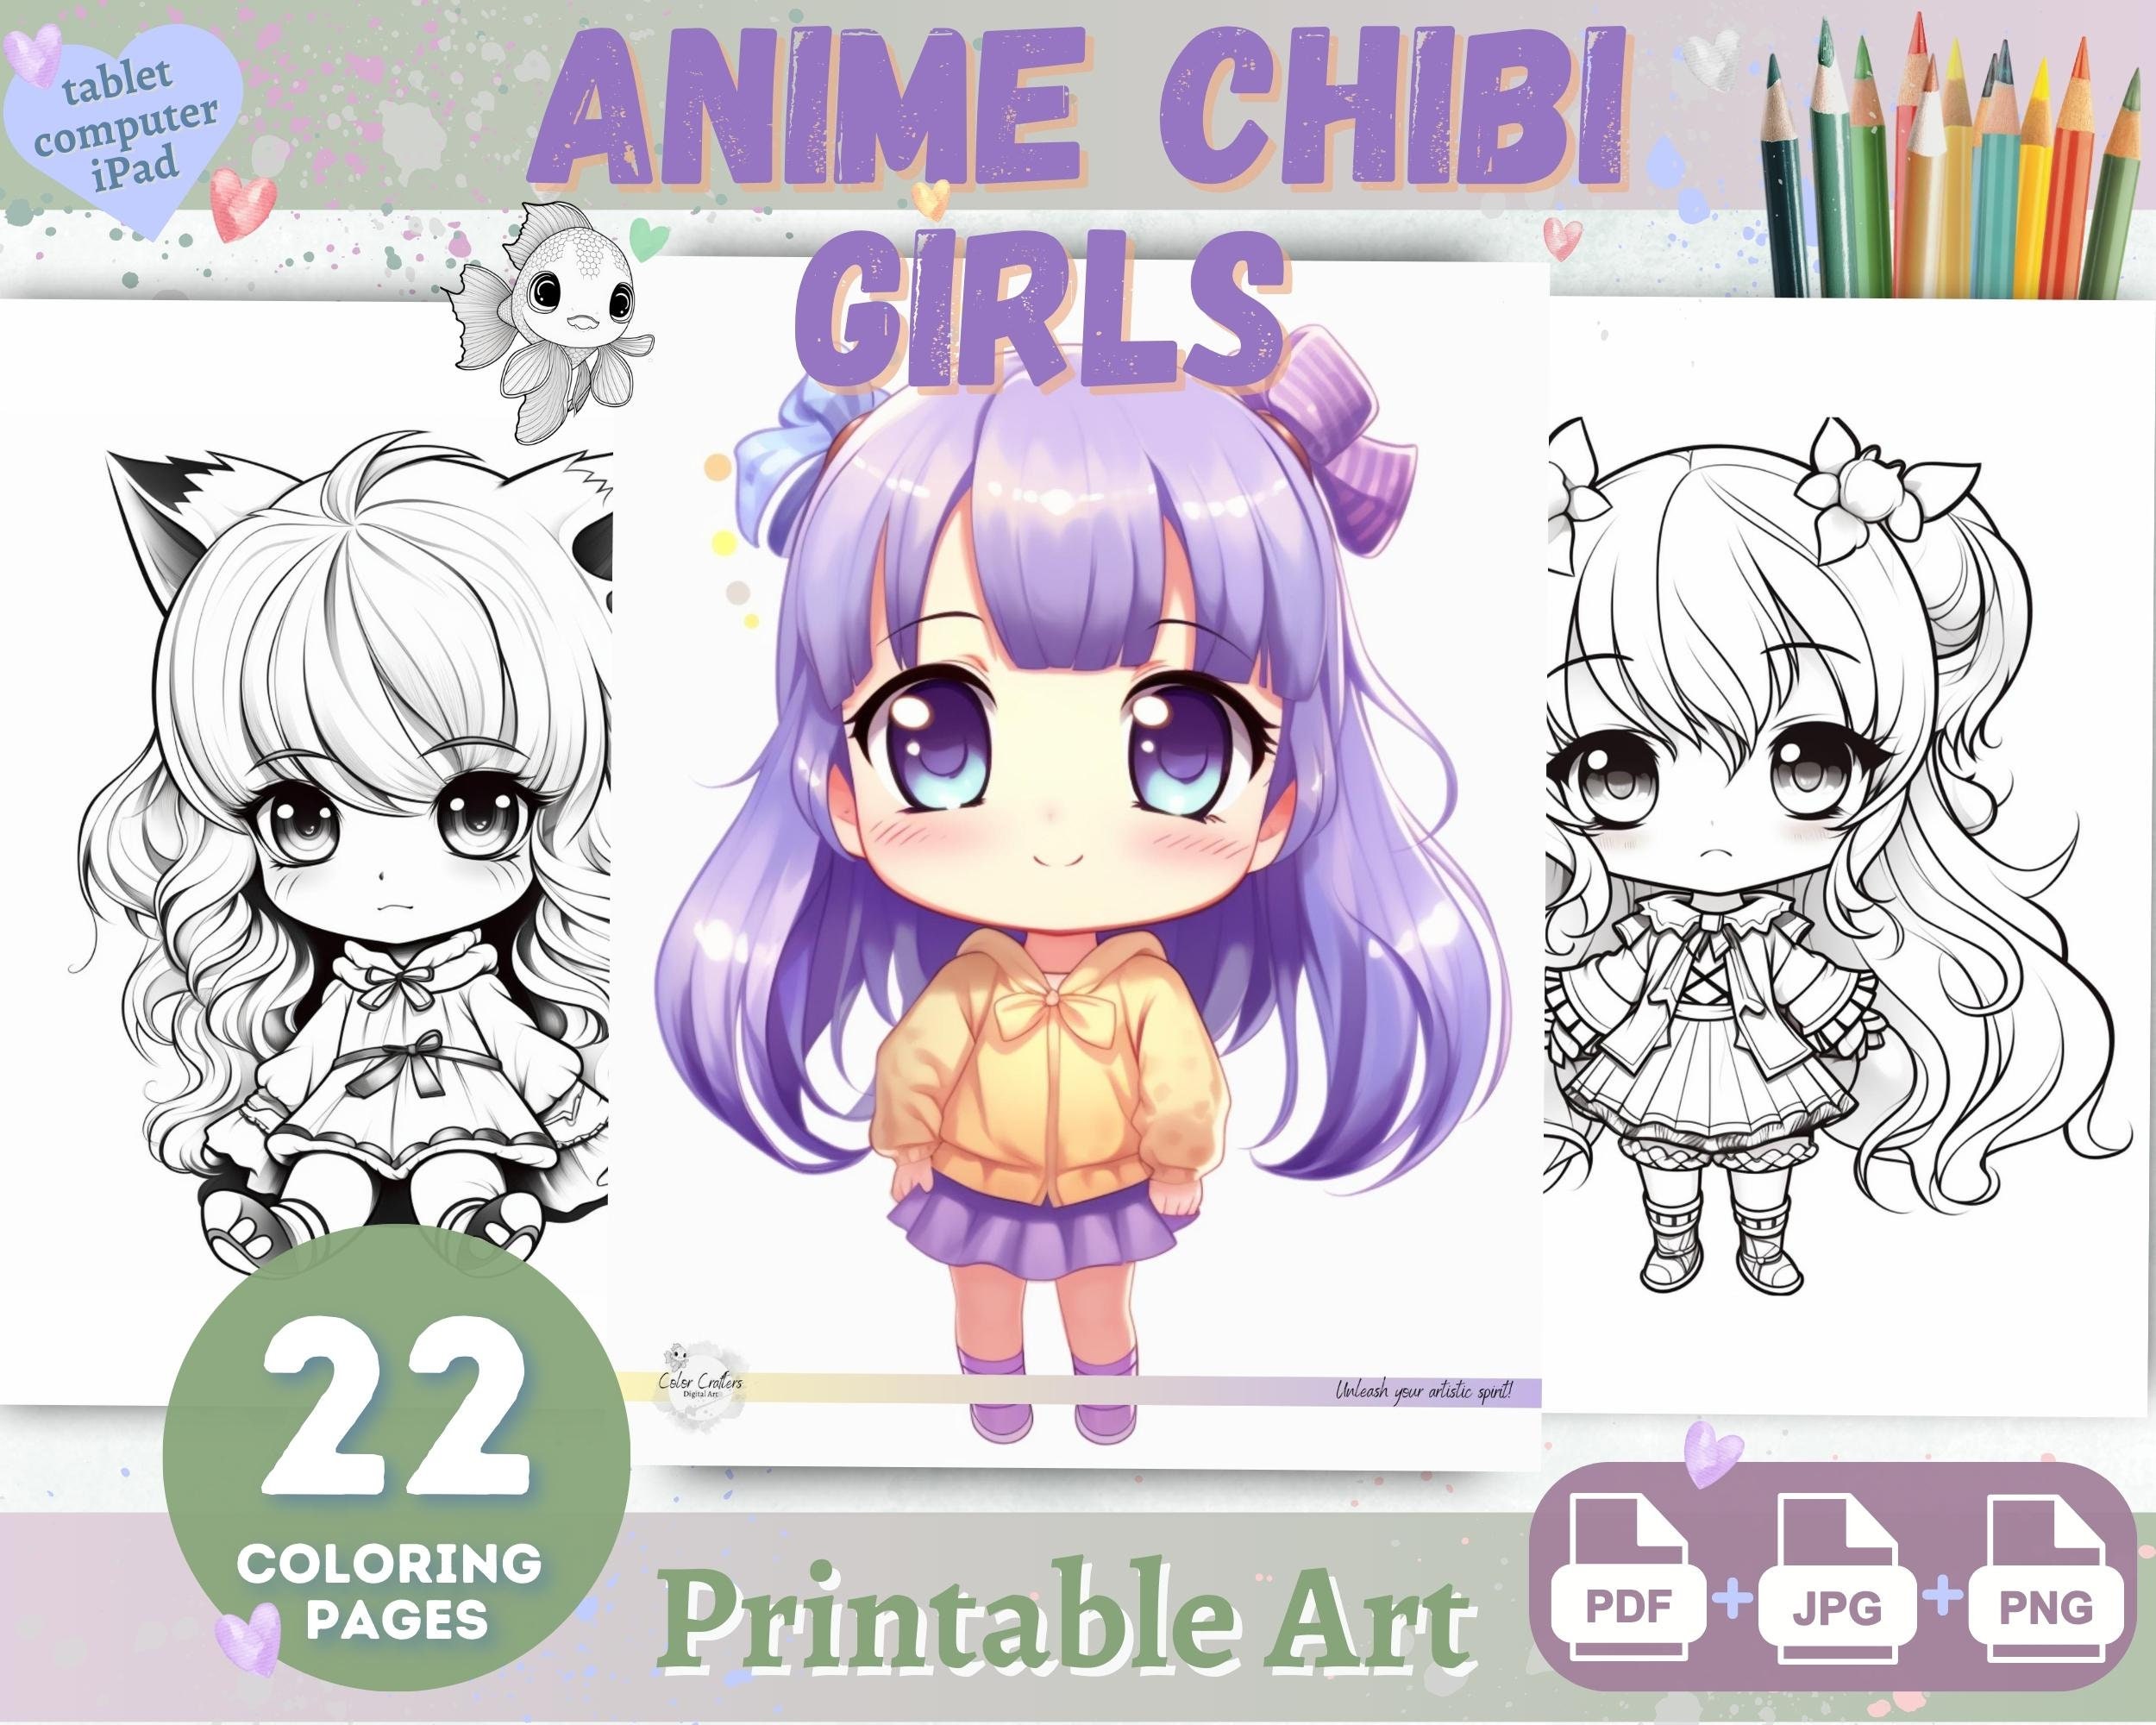 Just A Girl Who Loves Anime: Anime Drawing Book - Anime Sketchbook For  Drawing And Sketching 8X10 120 Pages Anime Art Supplies Manga Otakus &  Artists Sketchbook Gift Prices, Shop Deals Online